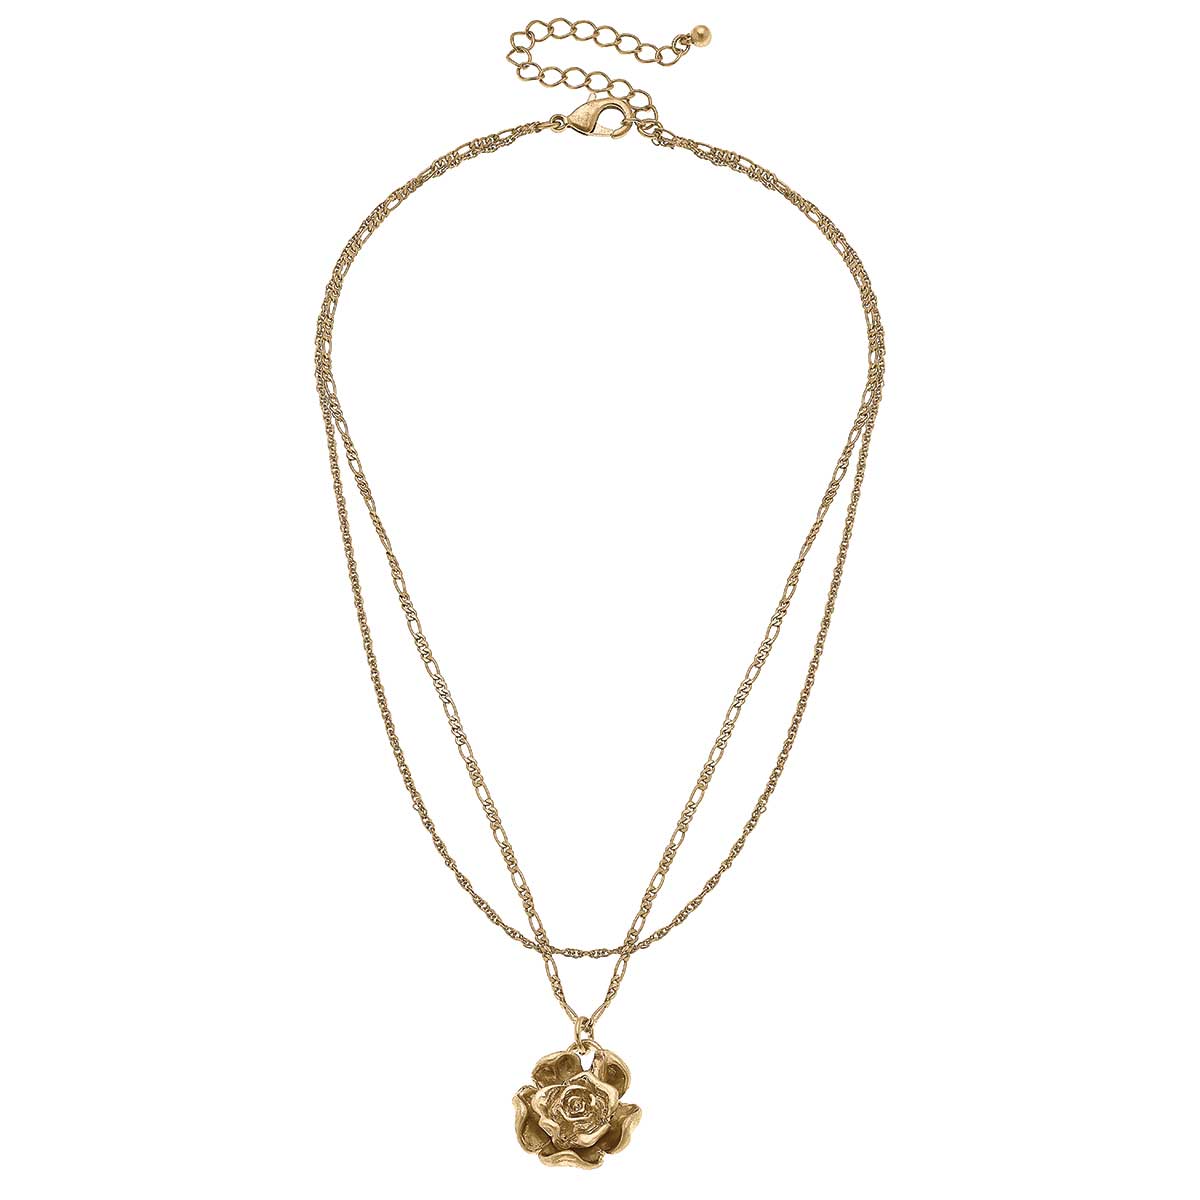 Sydney Rose Delicate Layered Necklace in Worn Gold